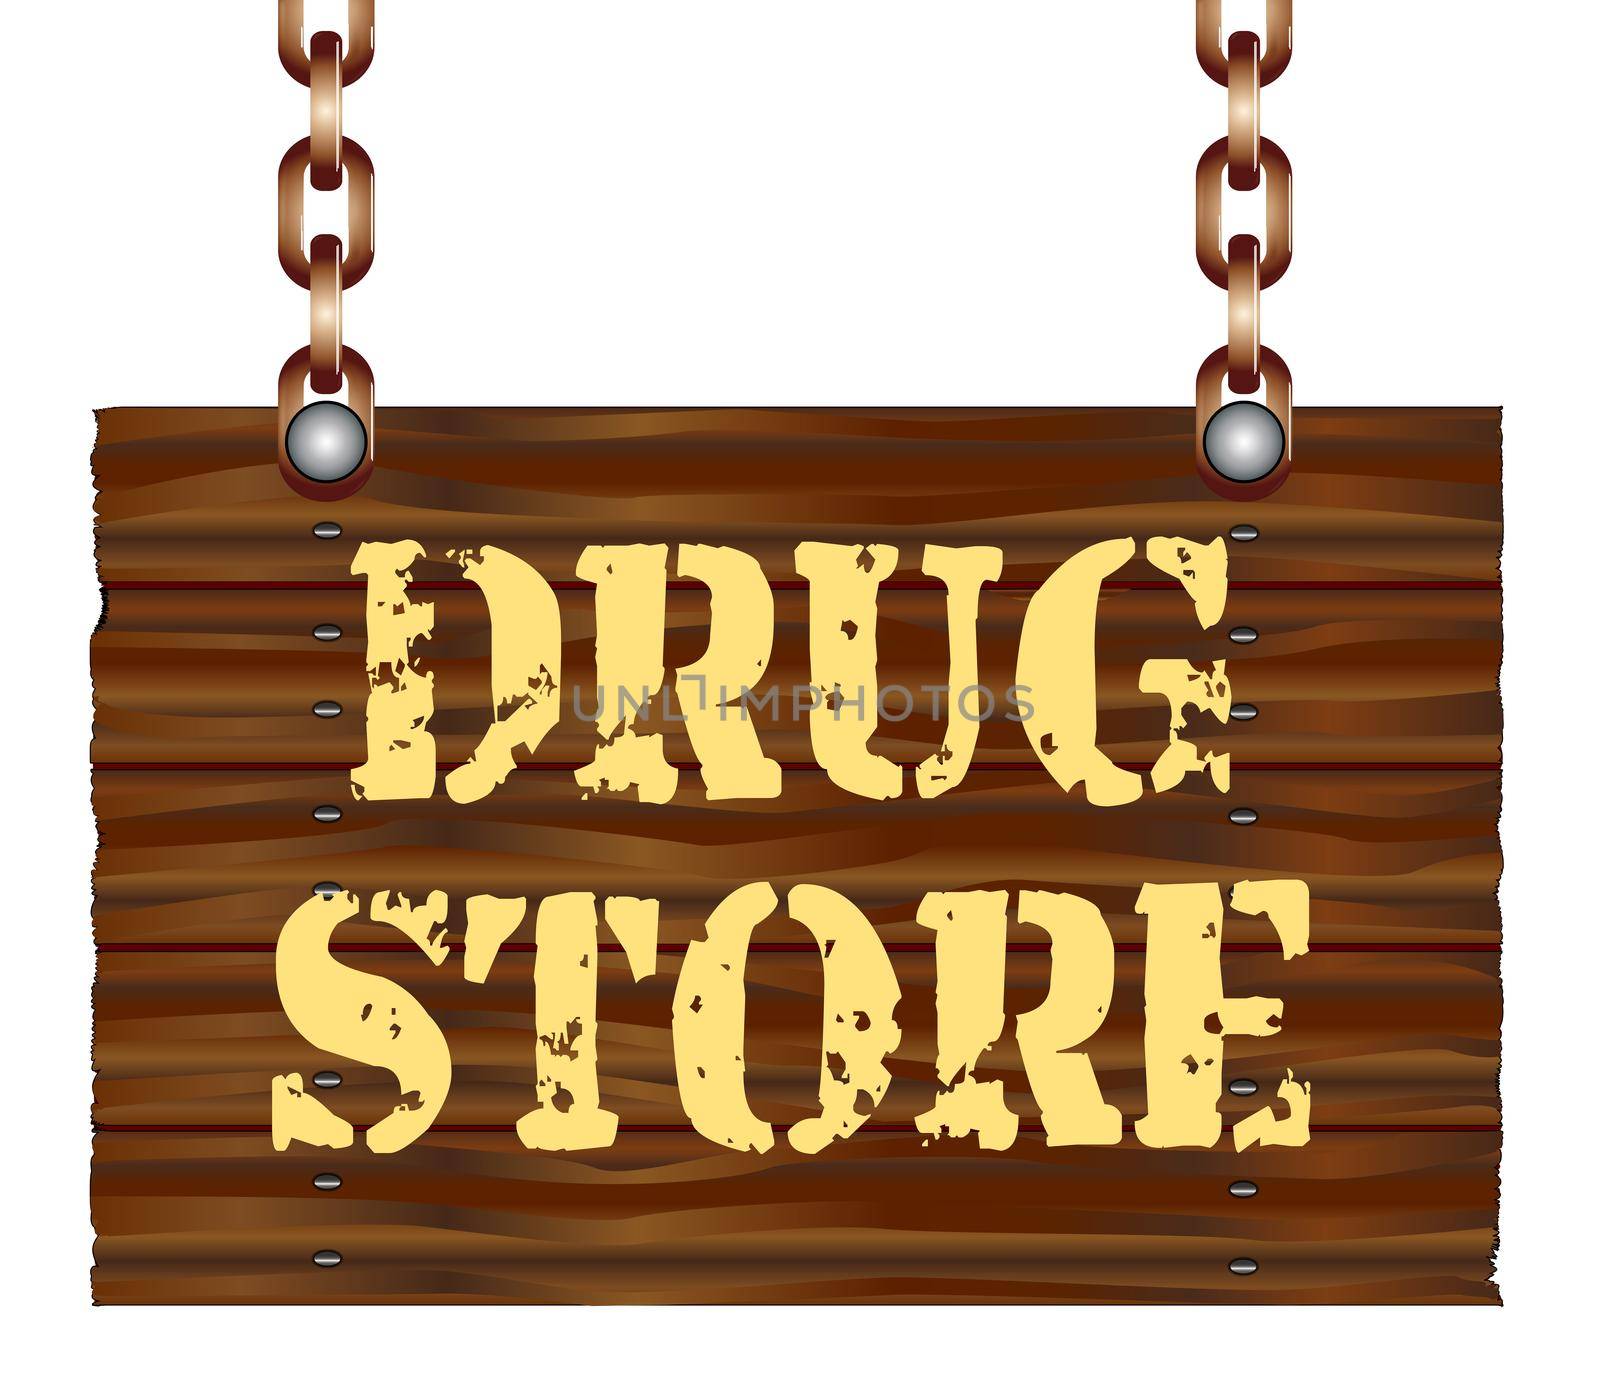 A hanging wooden drug store sign isolated against a white background.